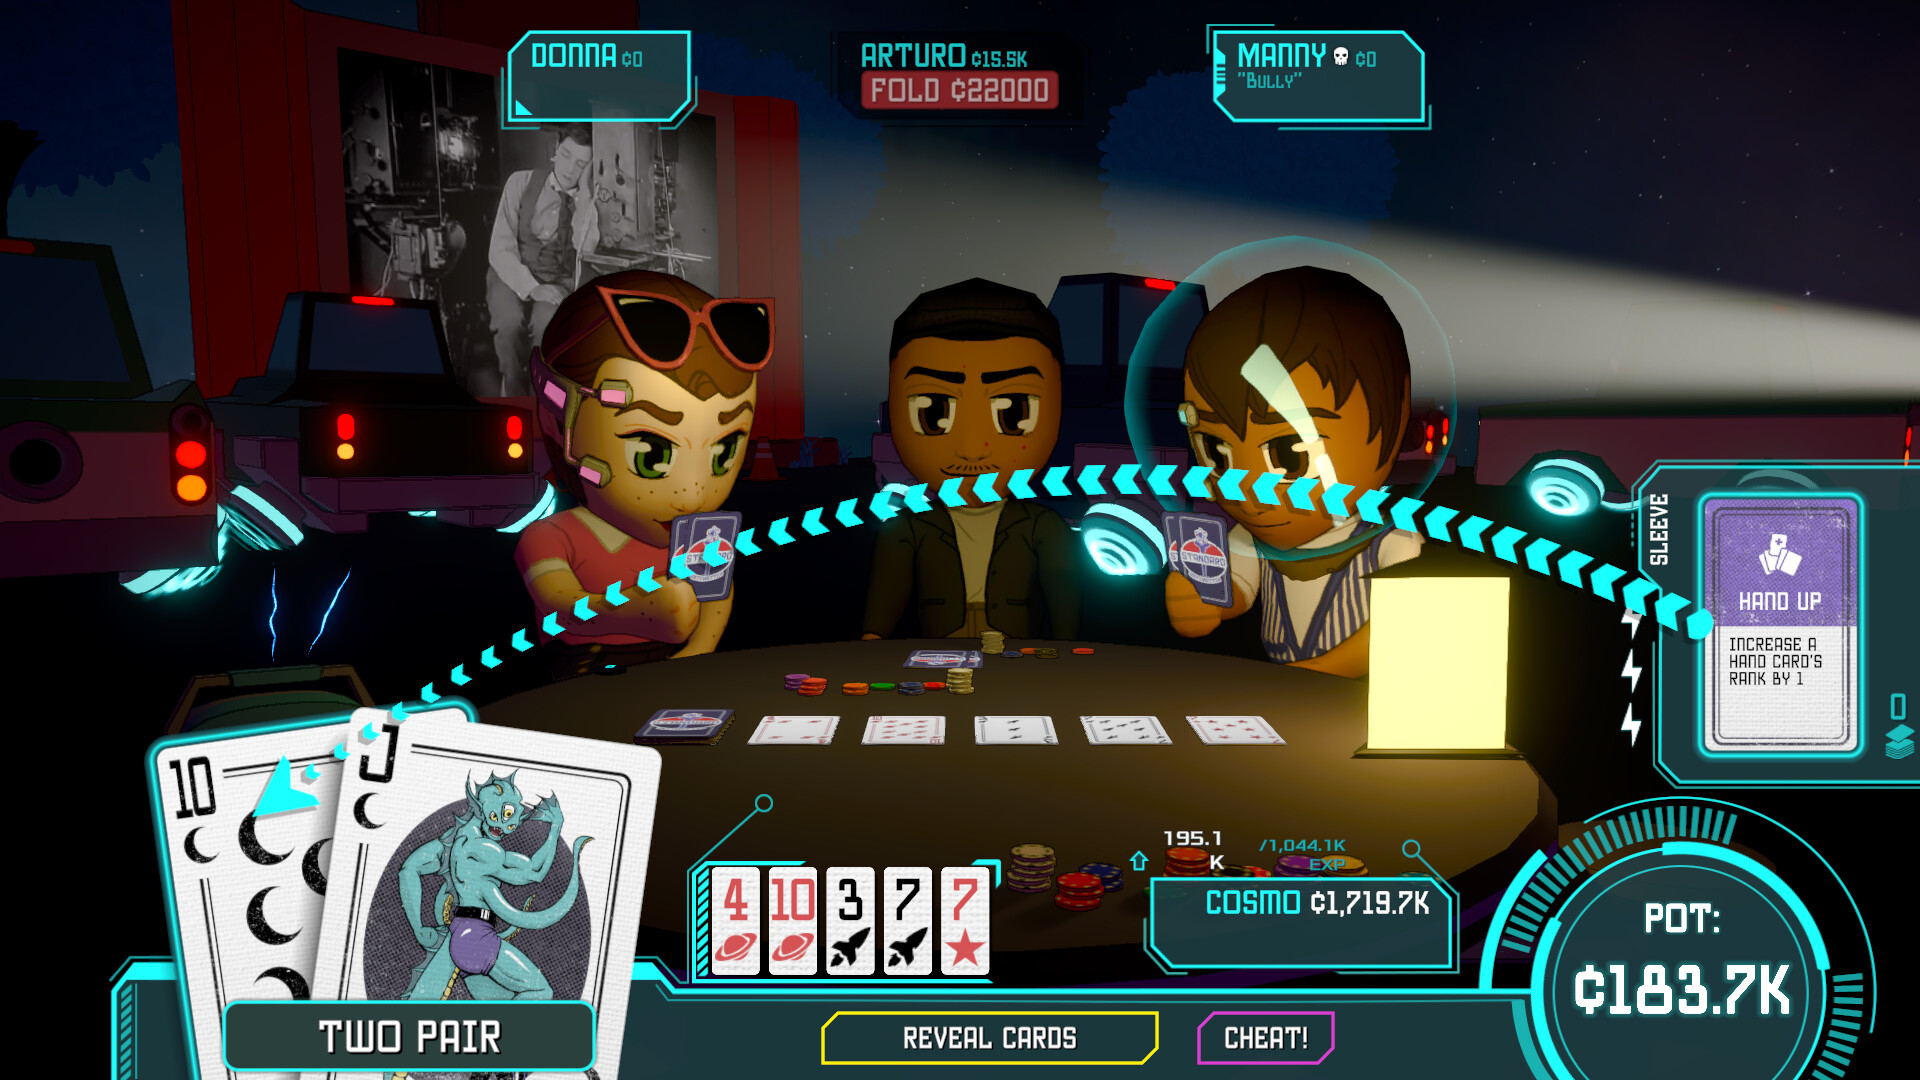 [$ 5.54] Cosmo Cheats at Poker Steam CD Key